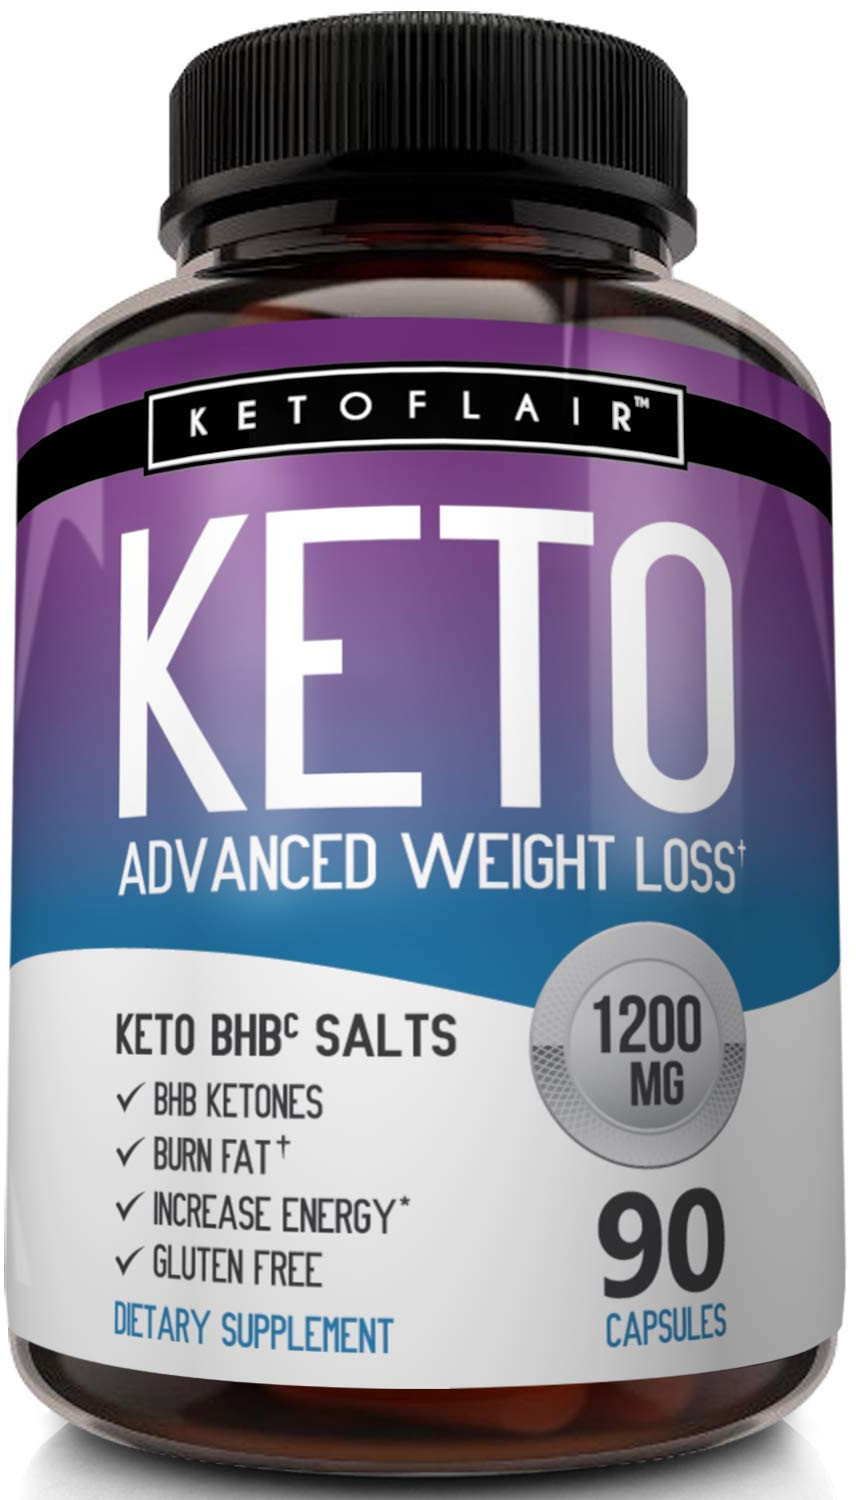 Keto Diet Supplements
 Keto Diet Pills 1200mg 90 Capsules Advanced Weight Loss